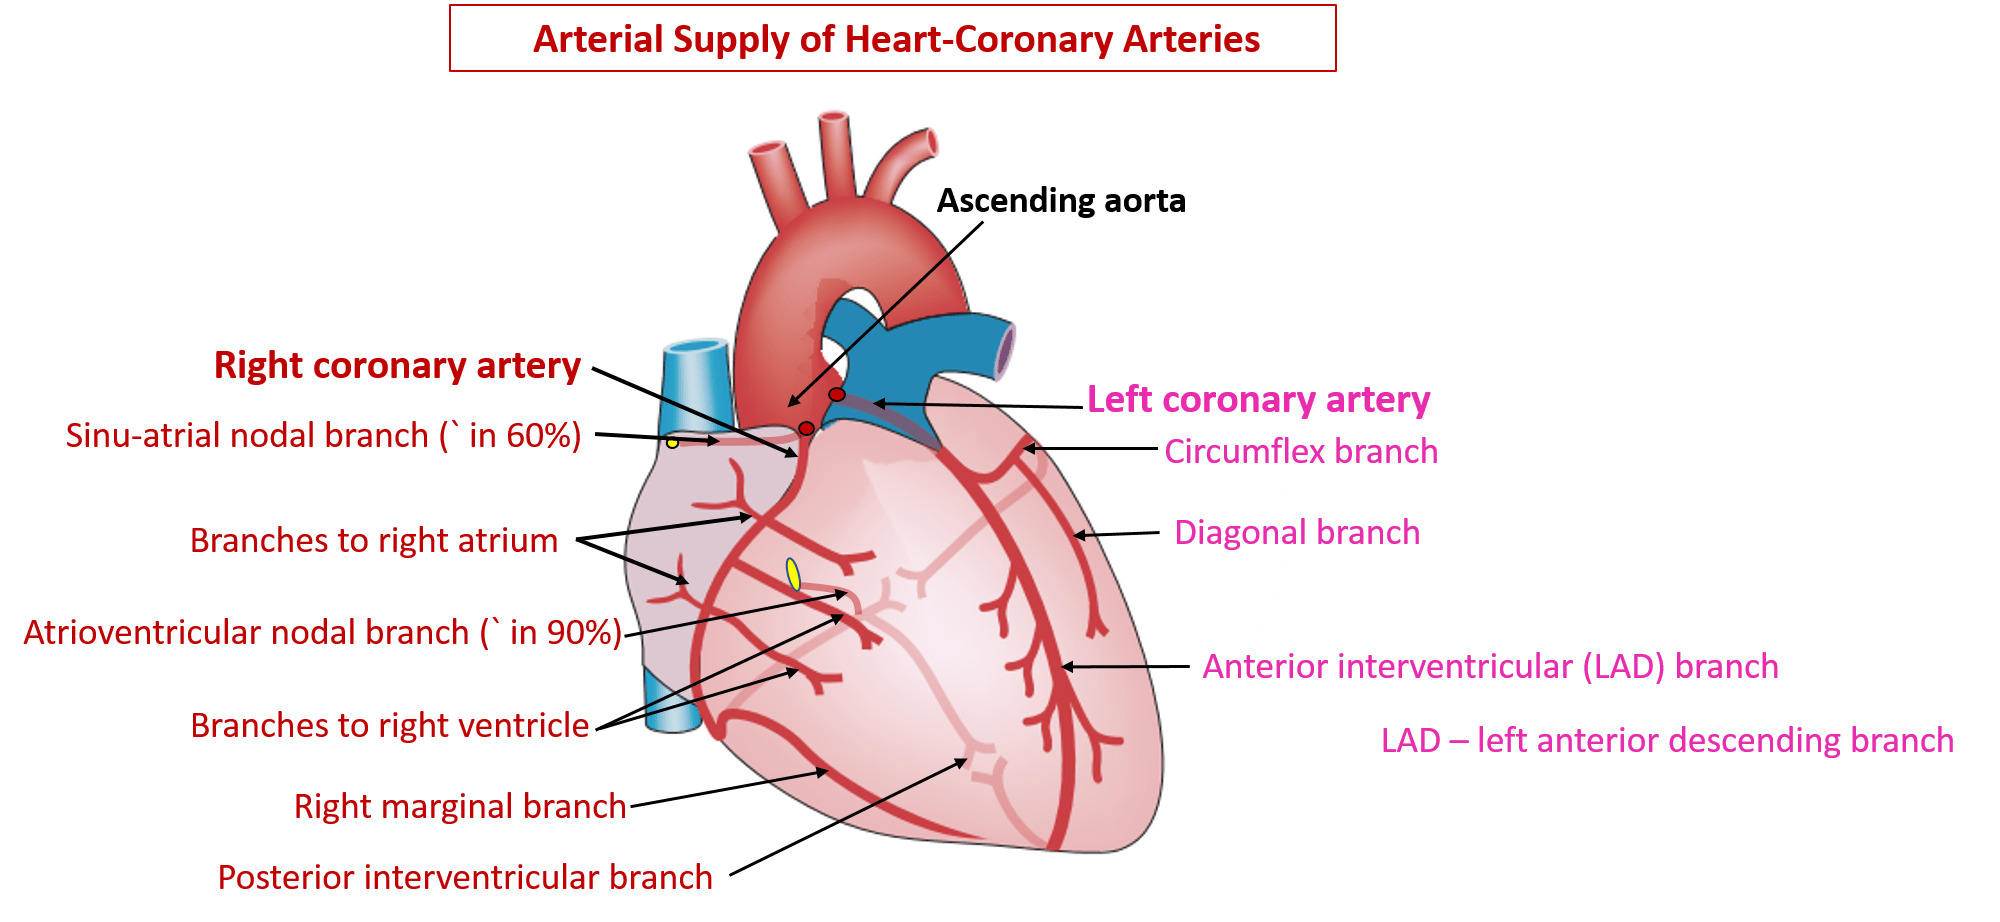 Blood Supply and Conducting System of Heart